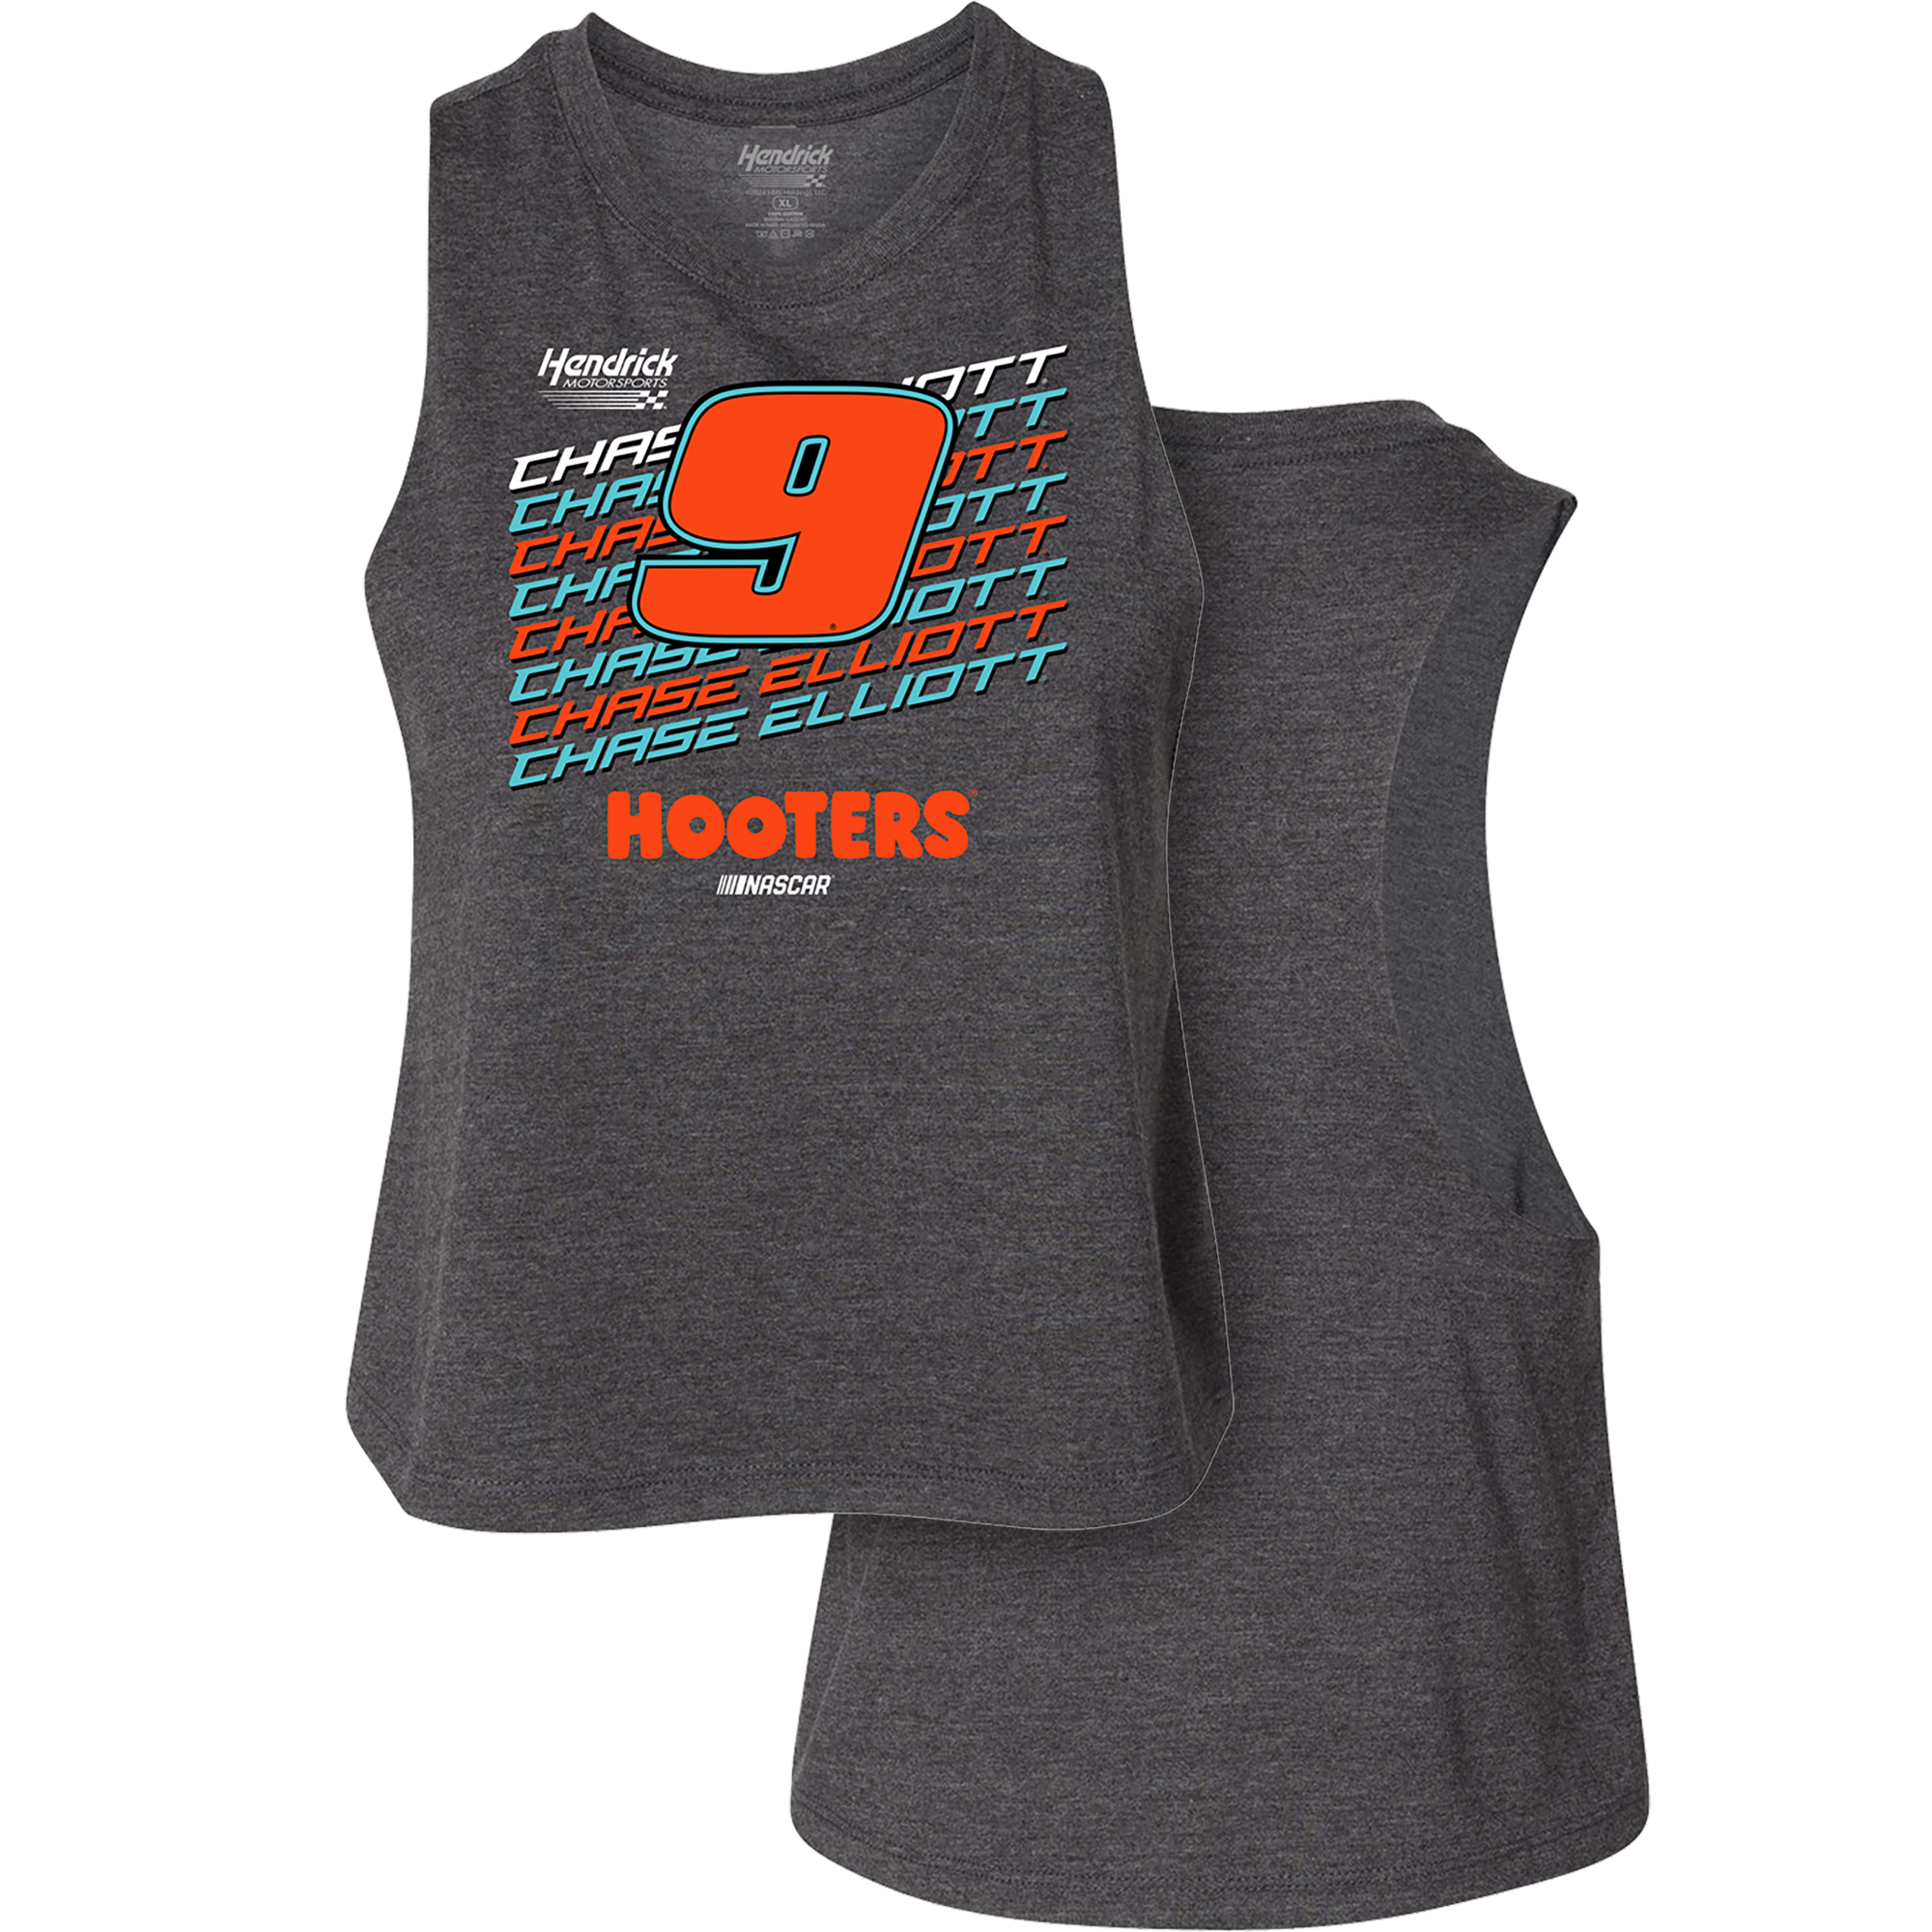 TANQUE HOOTERS GRIS PARA MUJER